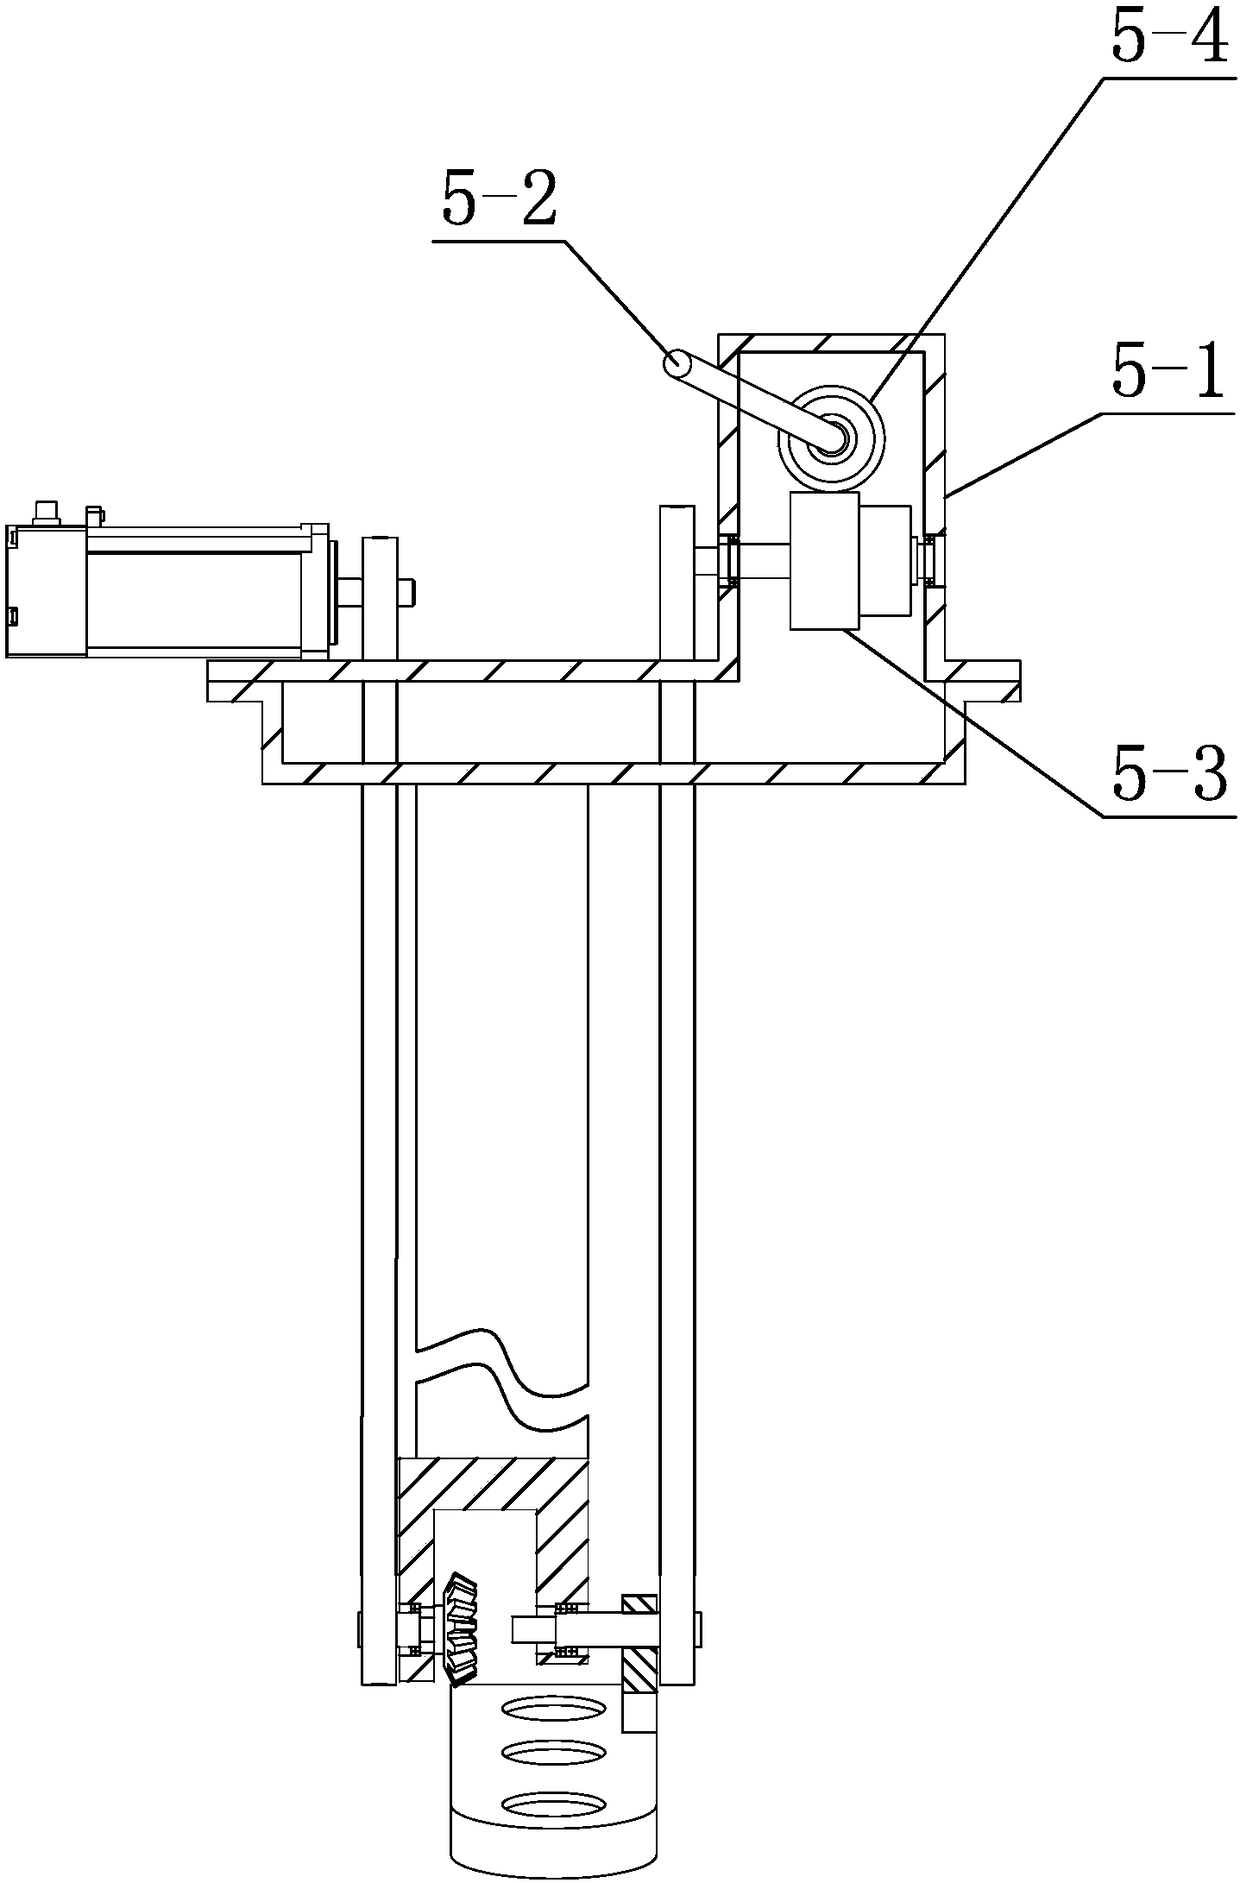 A mechanical arm tooling mechanism for nut assembly in a narrow space